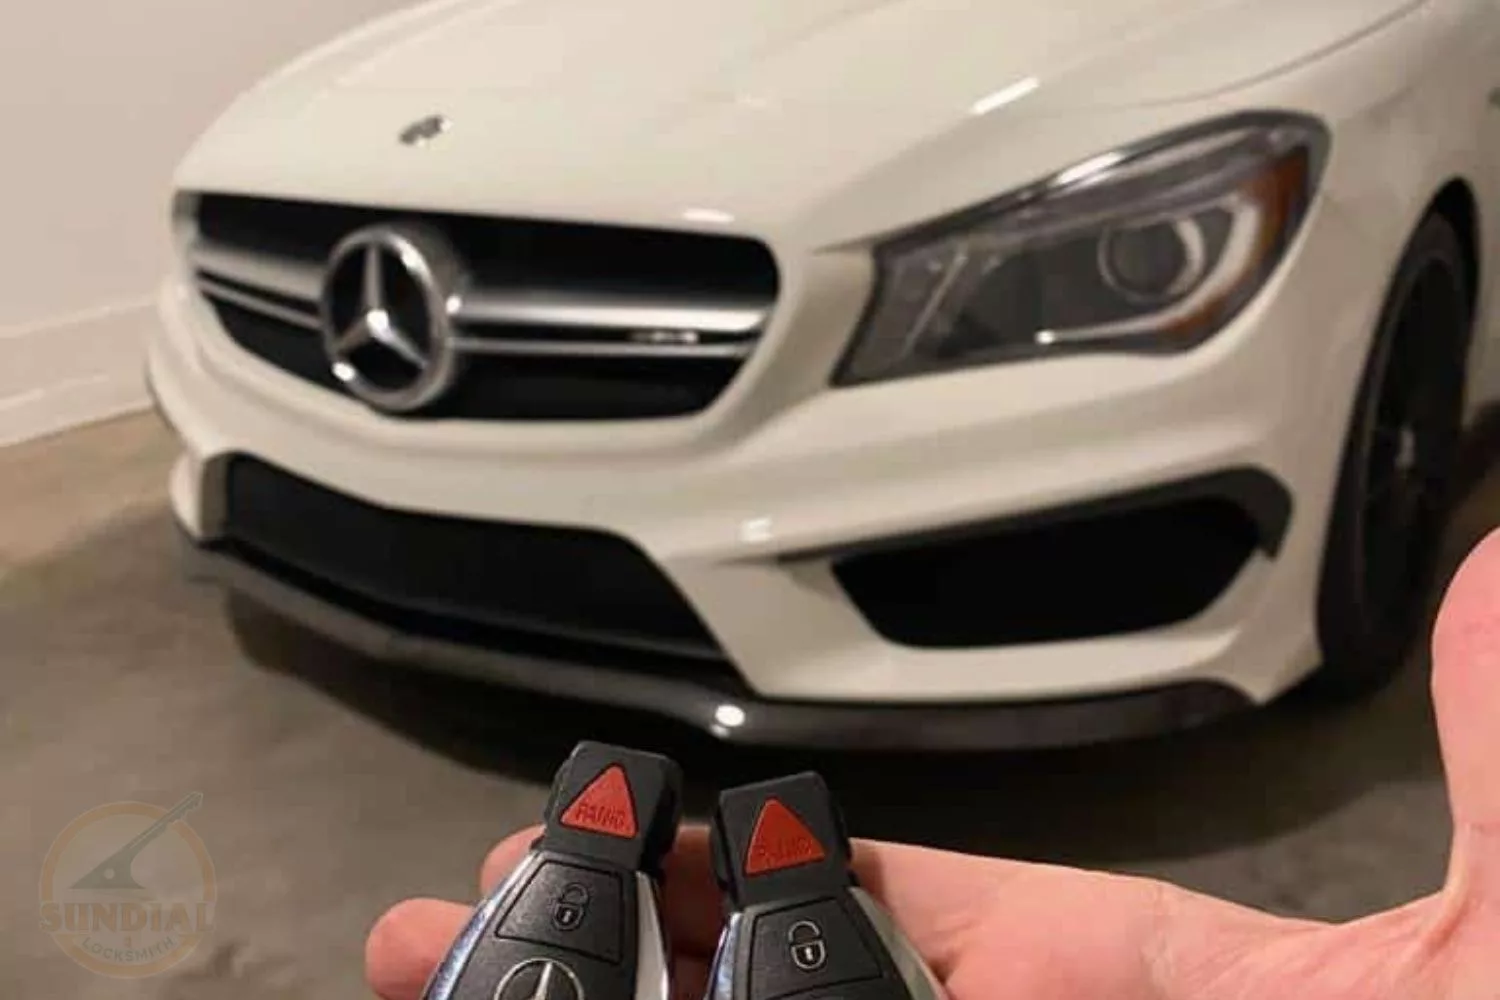 Mercedes car keys with vehicle in background.